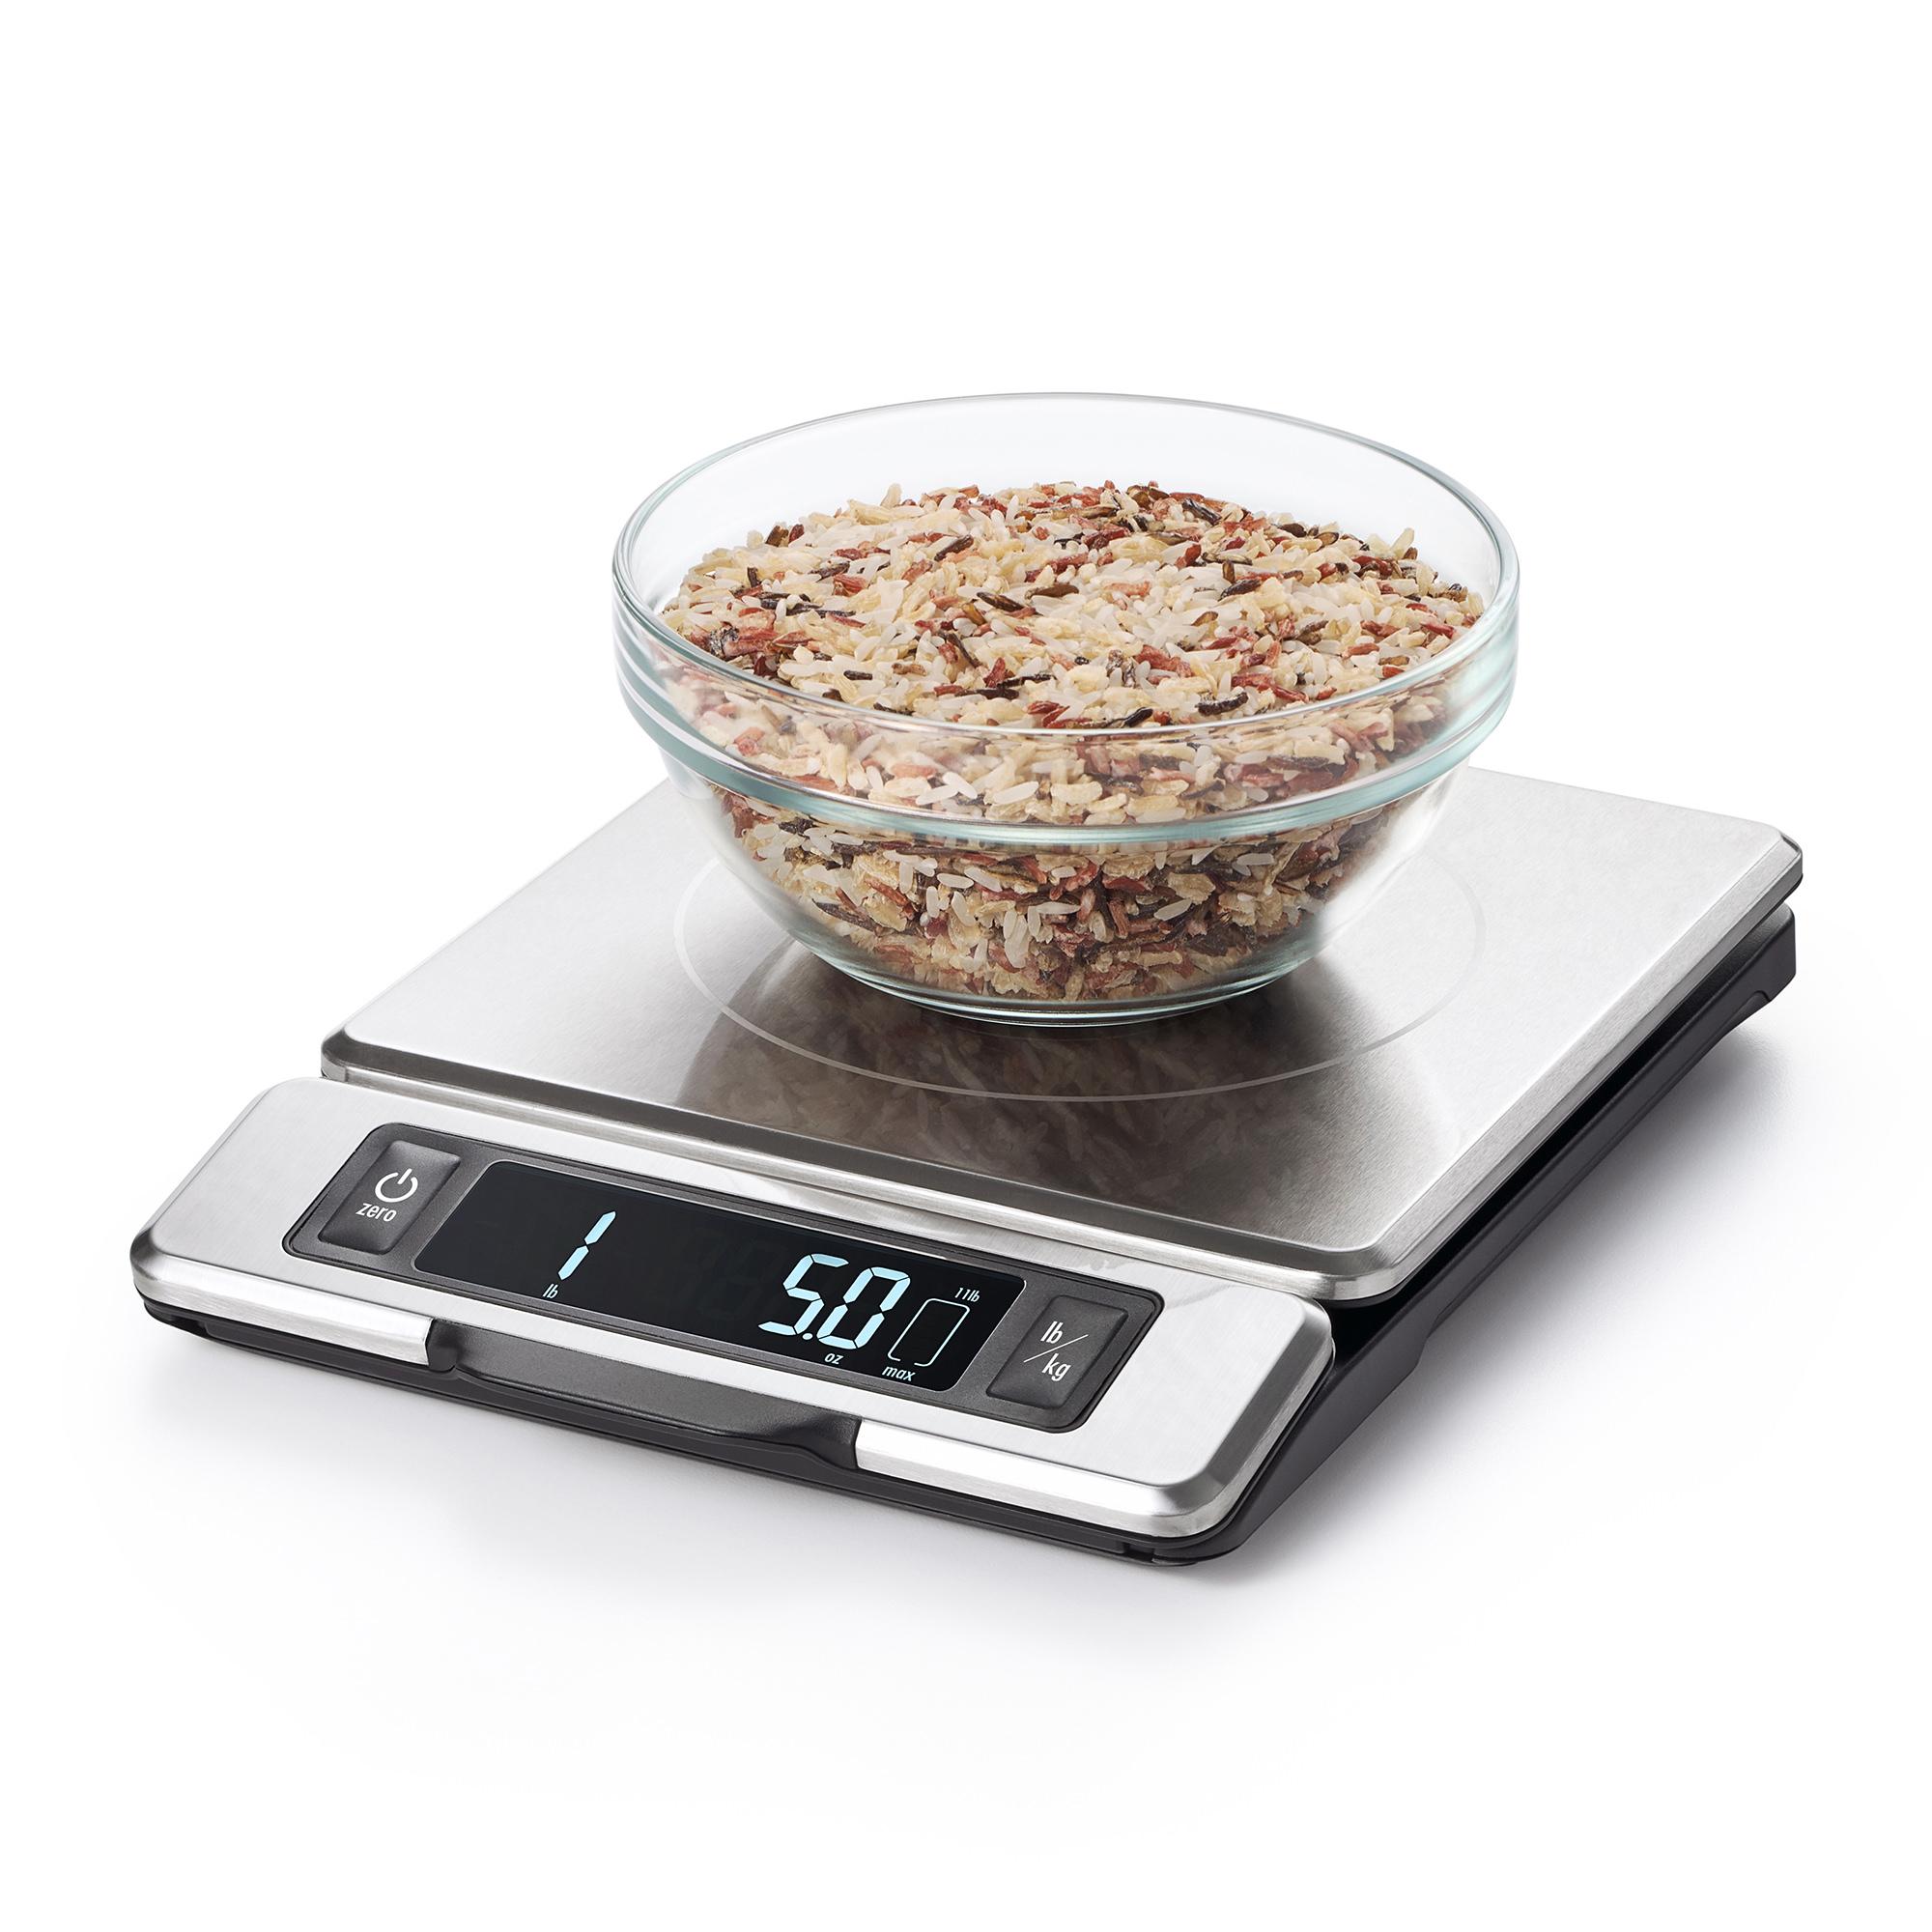 OXO Good Grips Stainless Steel Food Scale with Pull Out Display 5kg Image 5